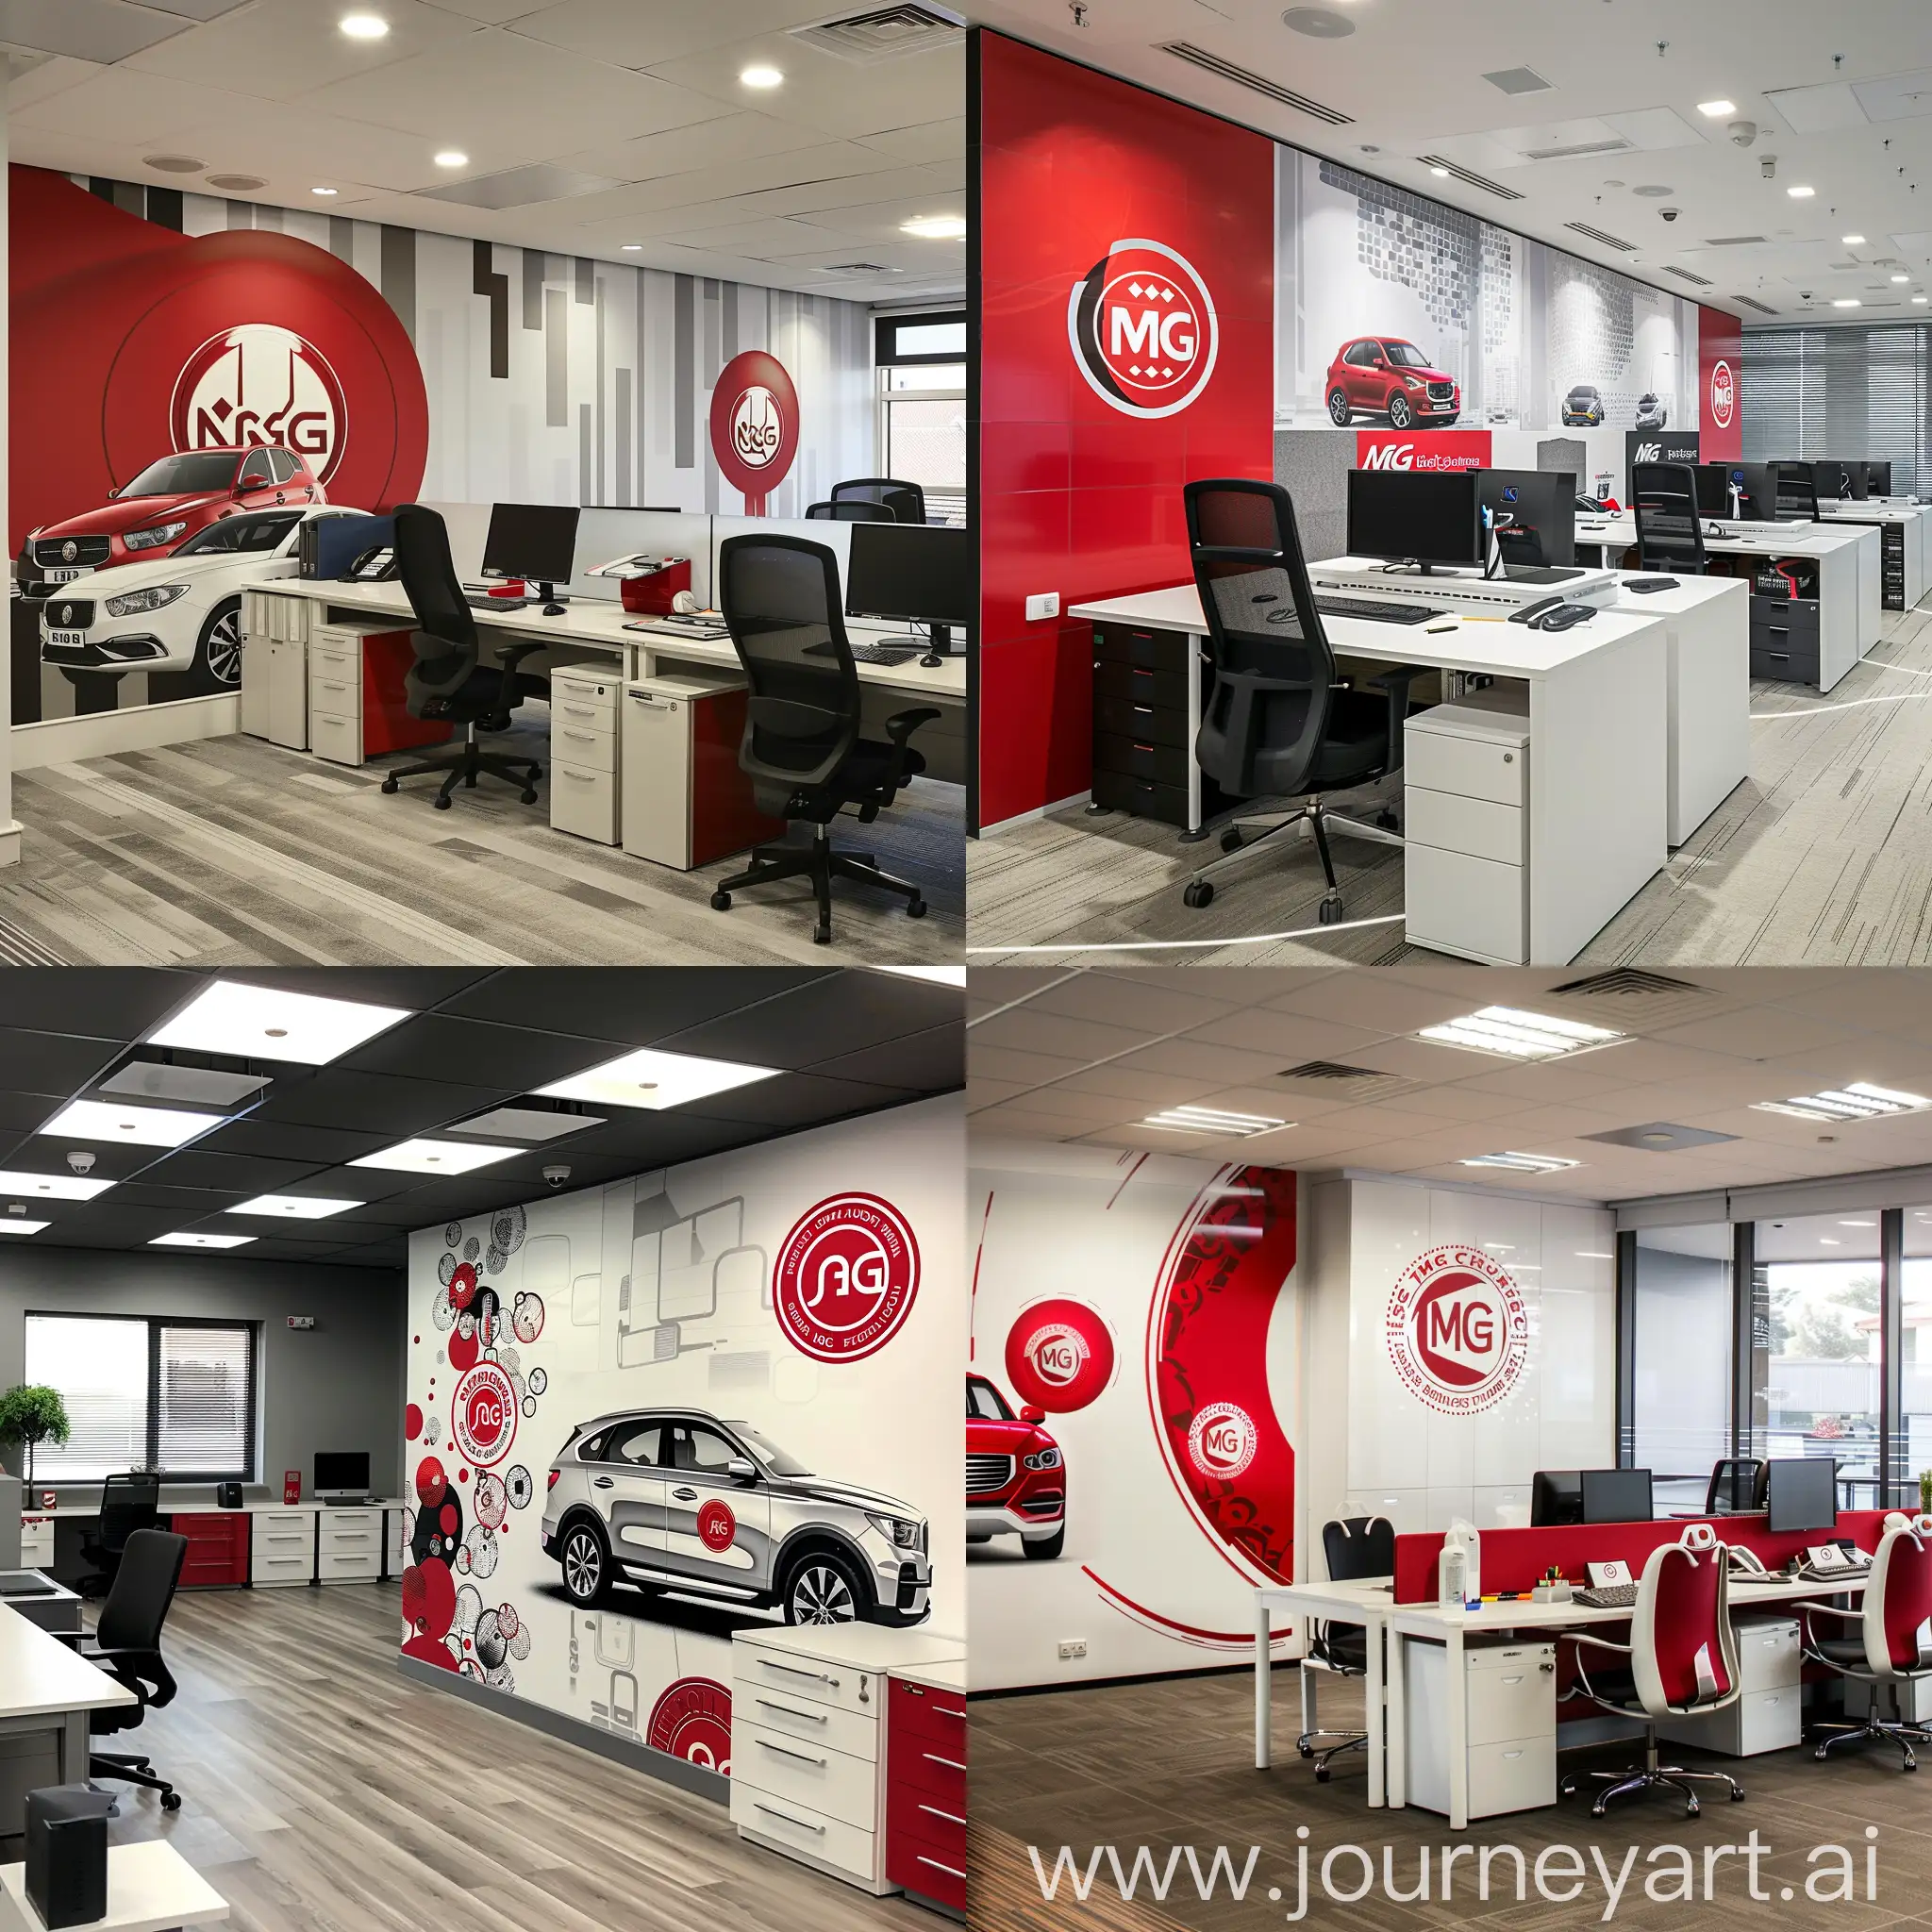 Modern-Office-Interior-with-MG-Motor-Branding-and-Elegant-Red-and-White-Designs